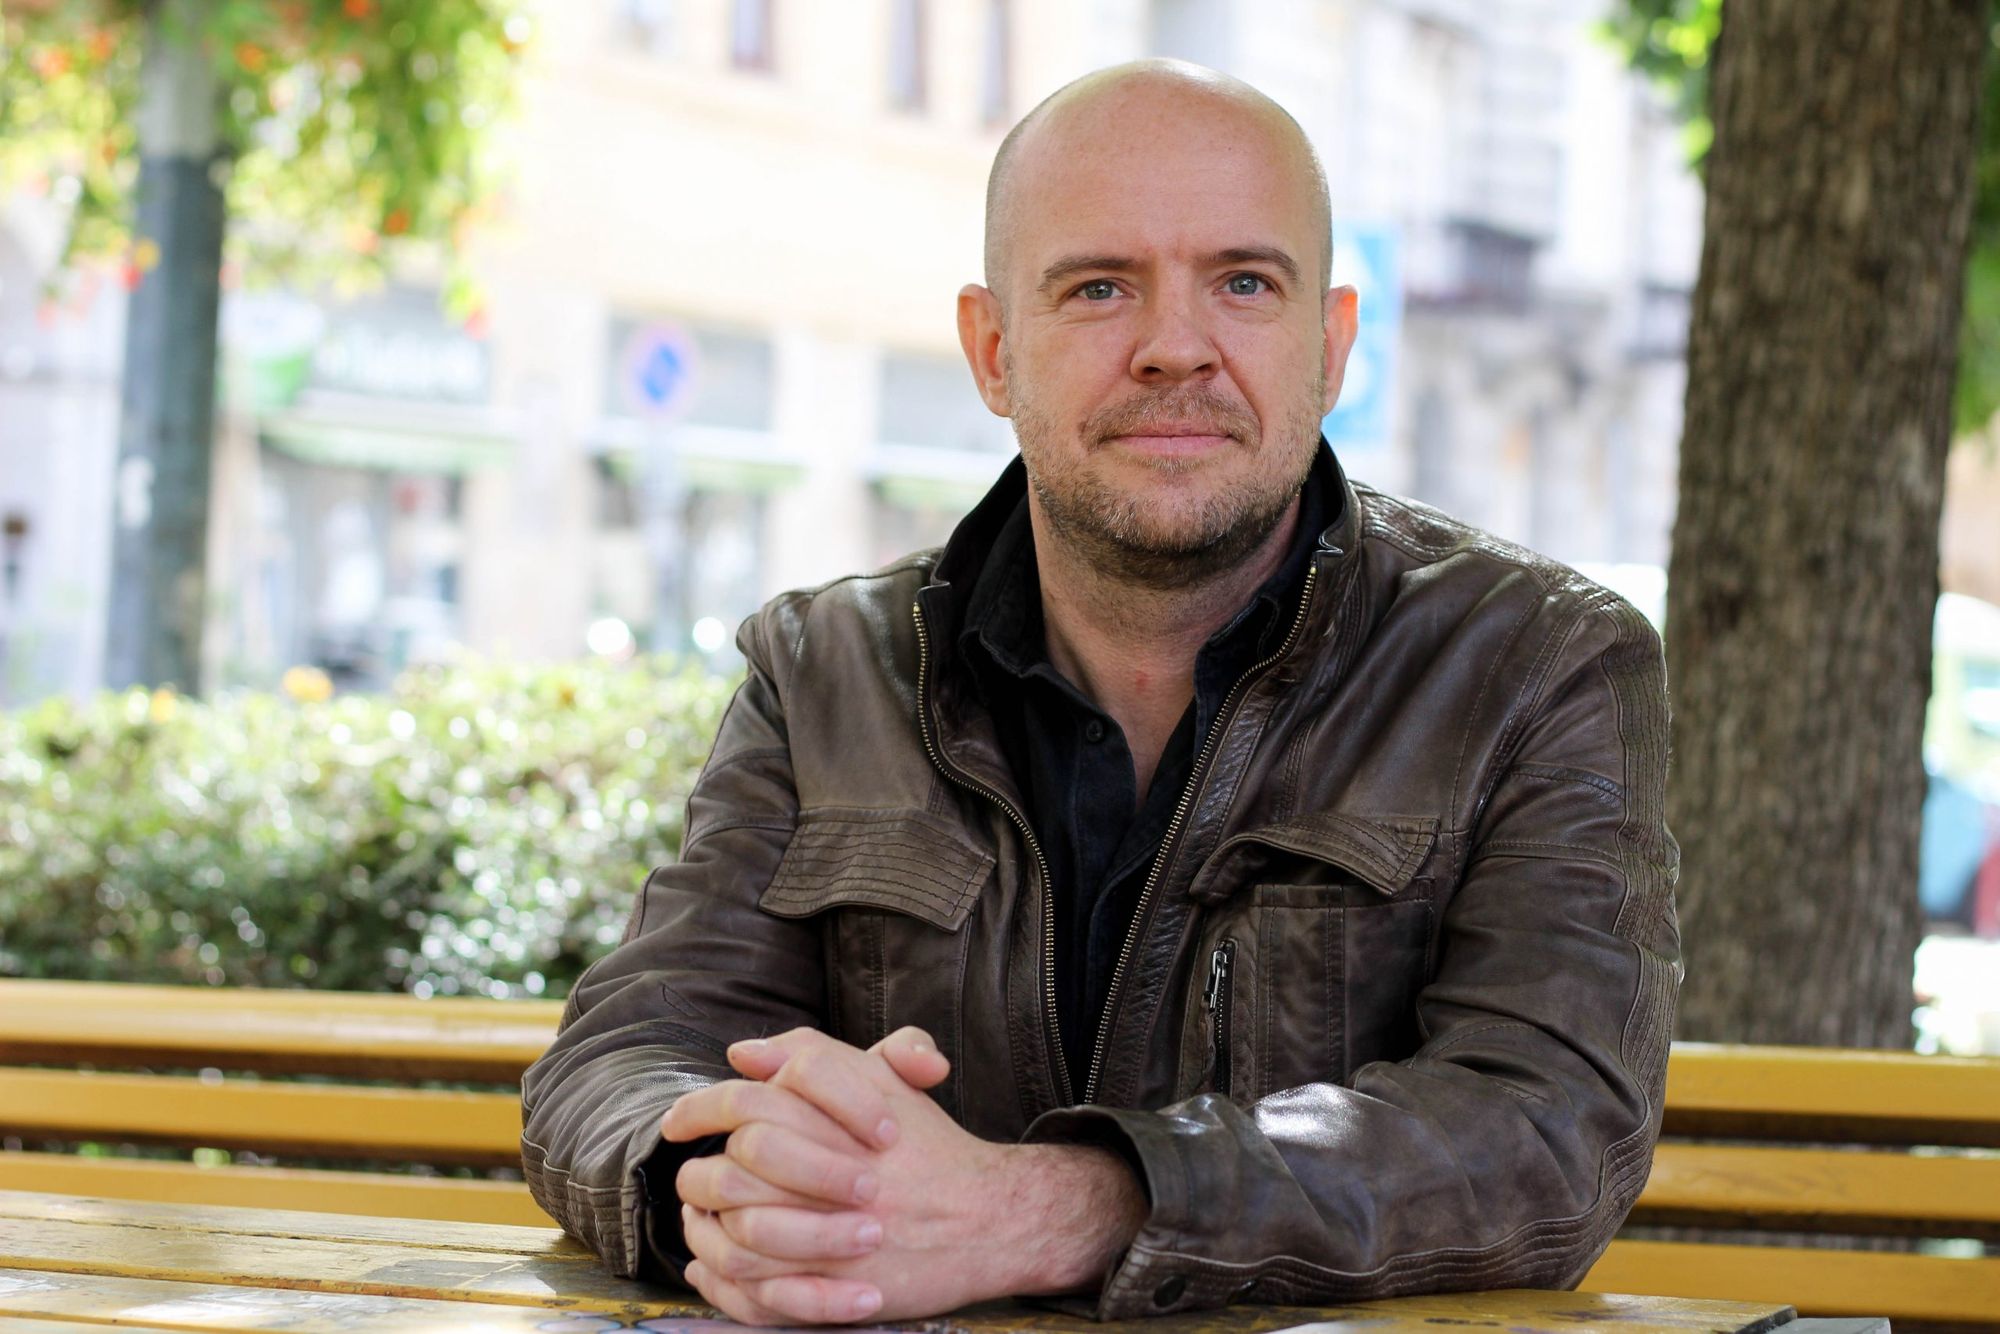 You can be at war with everyone, but not with your chef | Interview with Witold Szabłowski